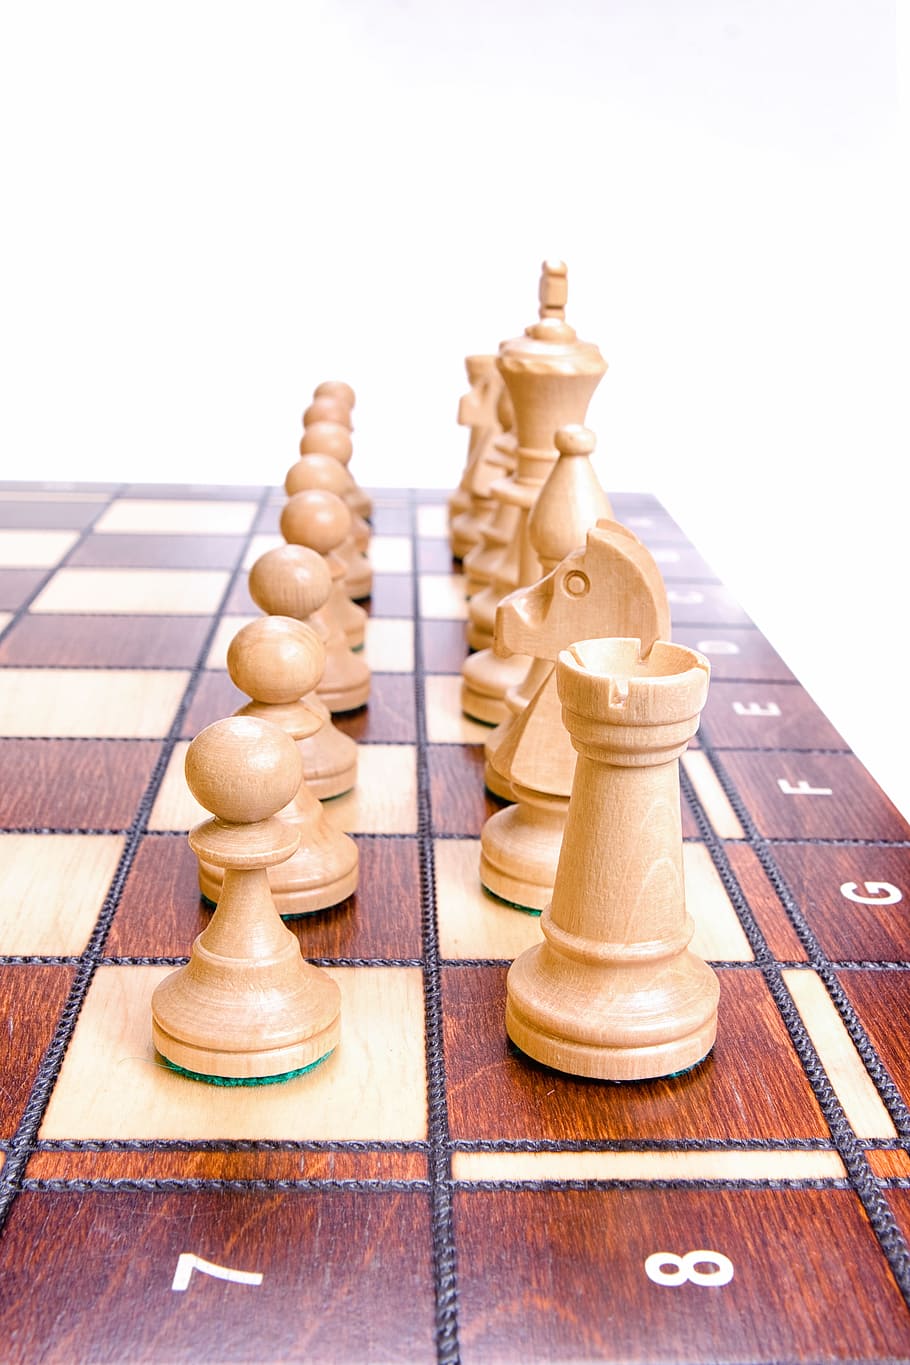 battle, board, brown, business, challenge, chess, chessboard, close, competition, decision